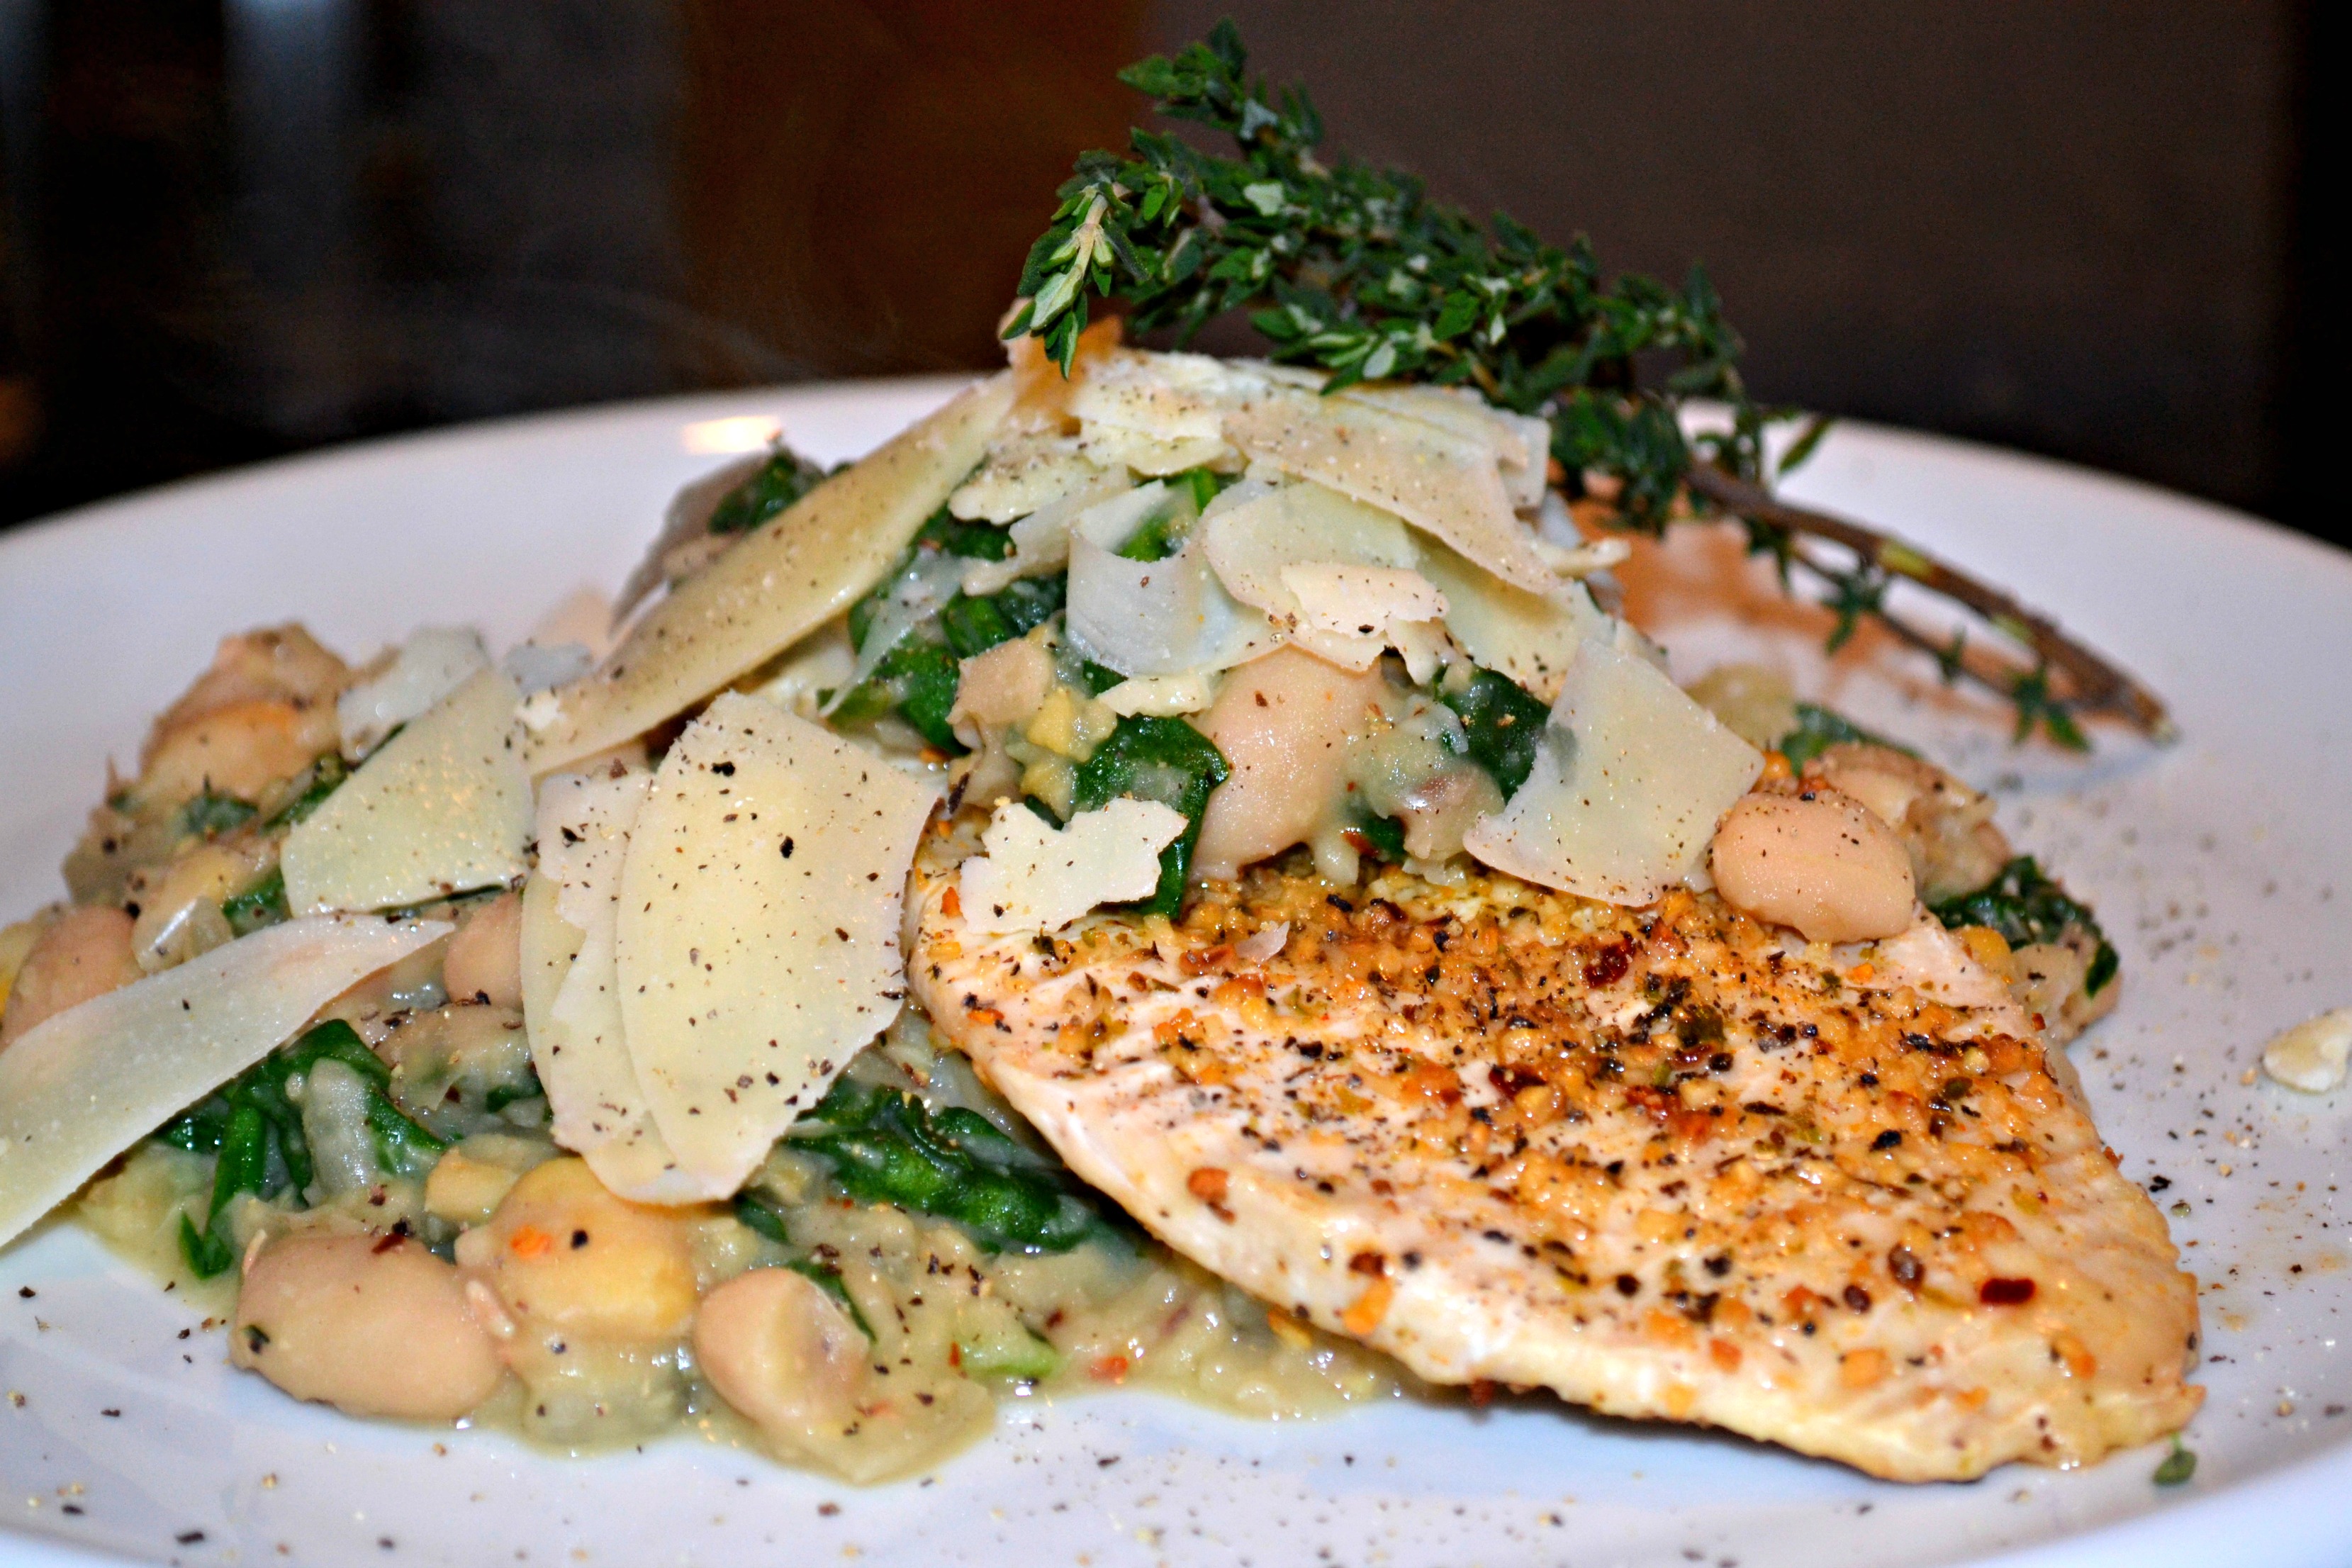 Herb-Spiced Chicken with a Spinach, Thyme and White Bean Ragout